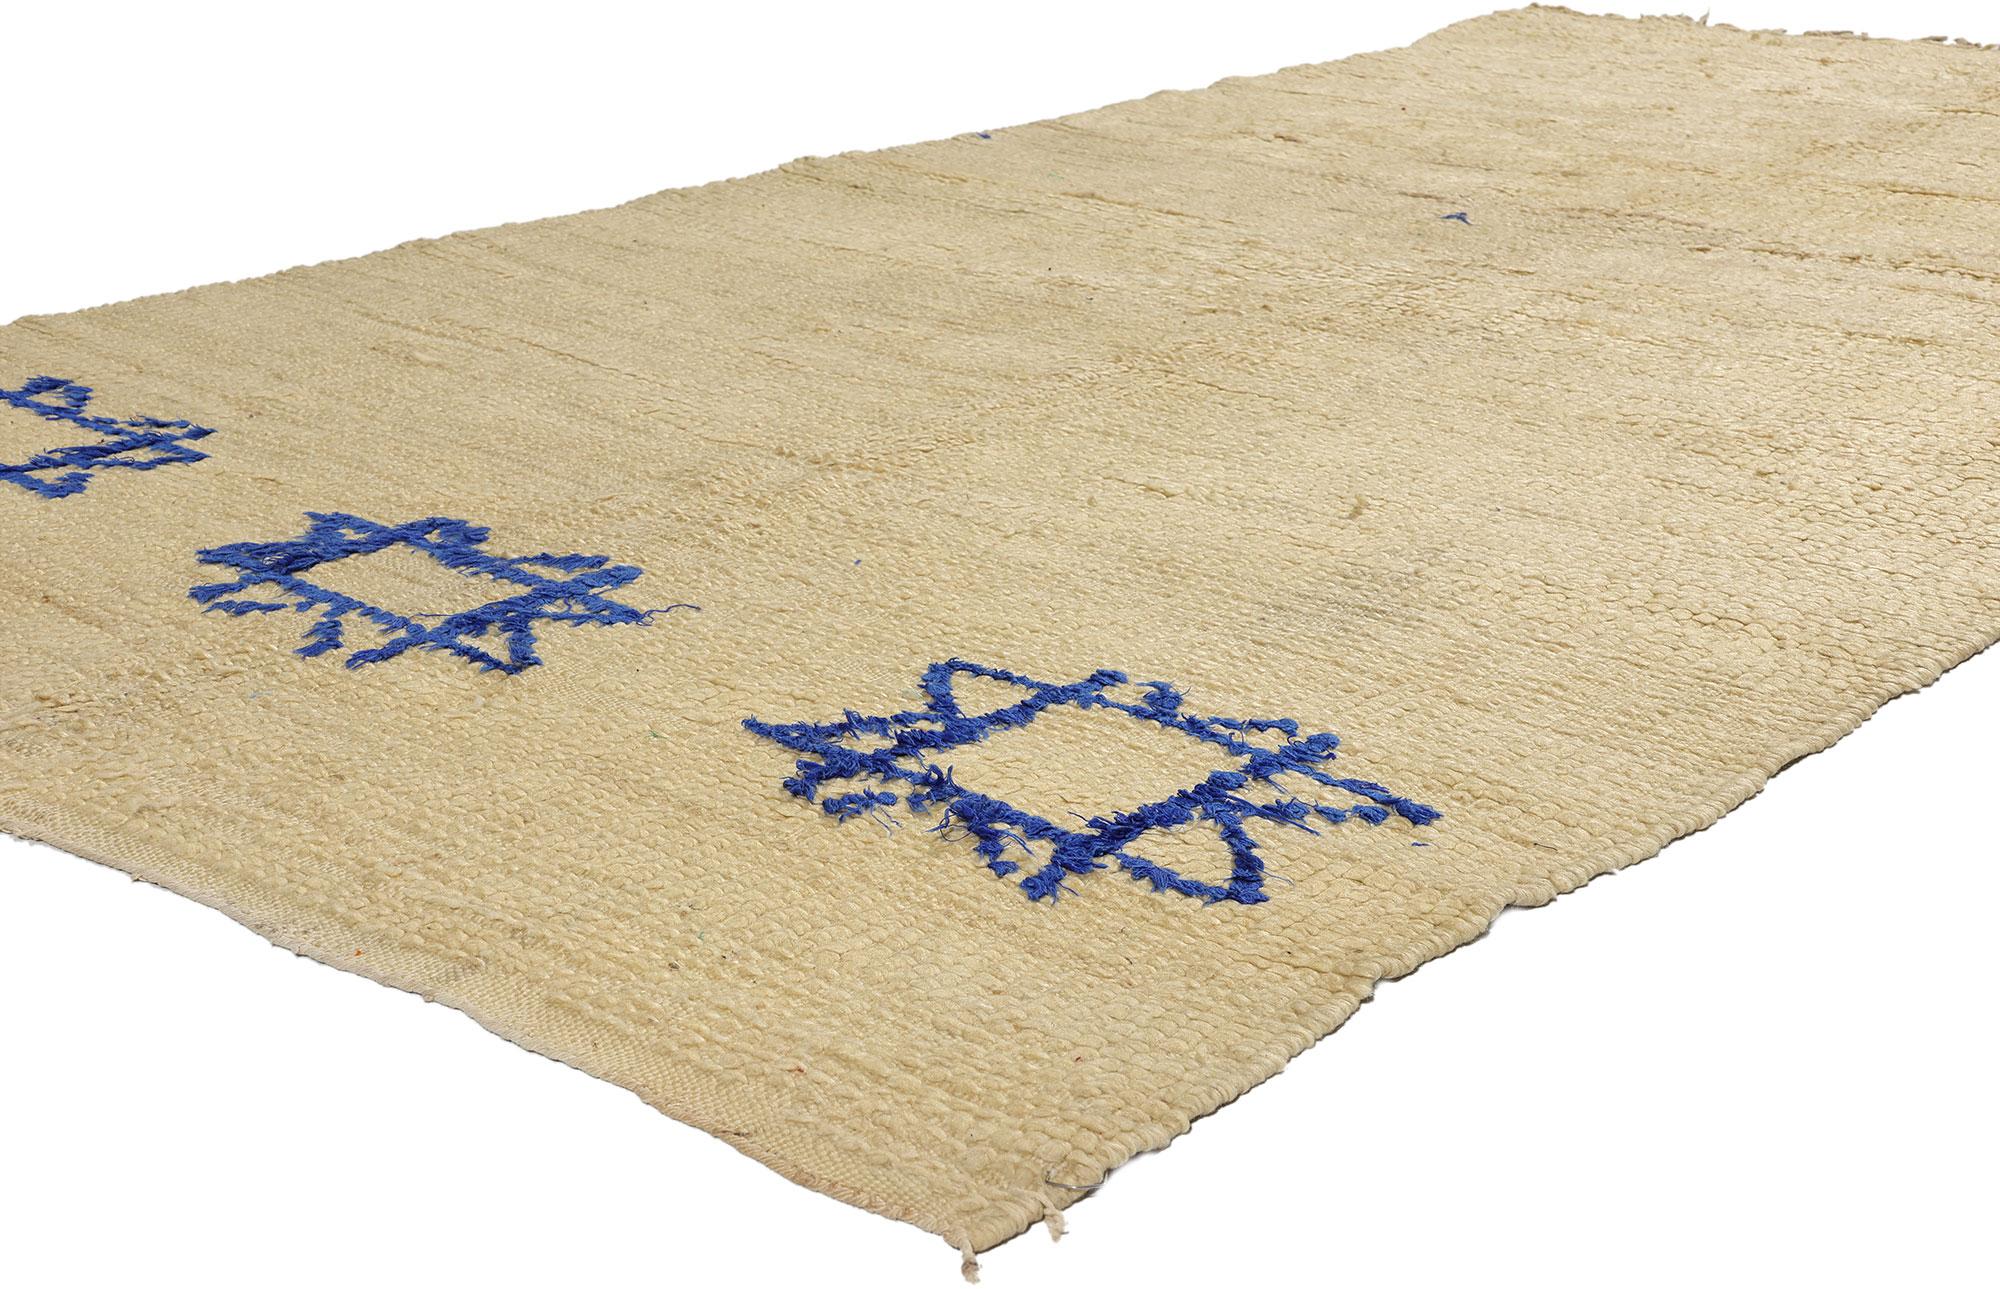 21756 Blue and Beige Vintage Moroccan Azilal Rug, 04'11 x 09'07. Enter the captivating essence of this hand-knotted wool vintage Moroccan rug from Azilal, nestled in the High Atlas Mountains. Adorned with three mesmerizing blue Solomon Star motifs,